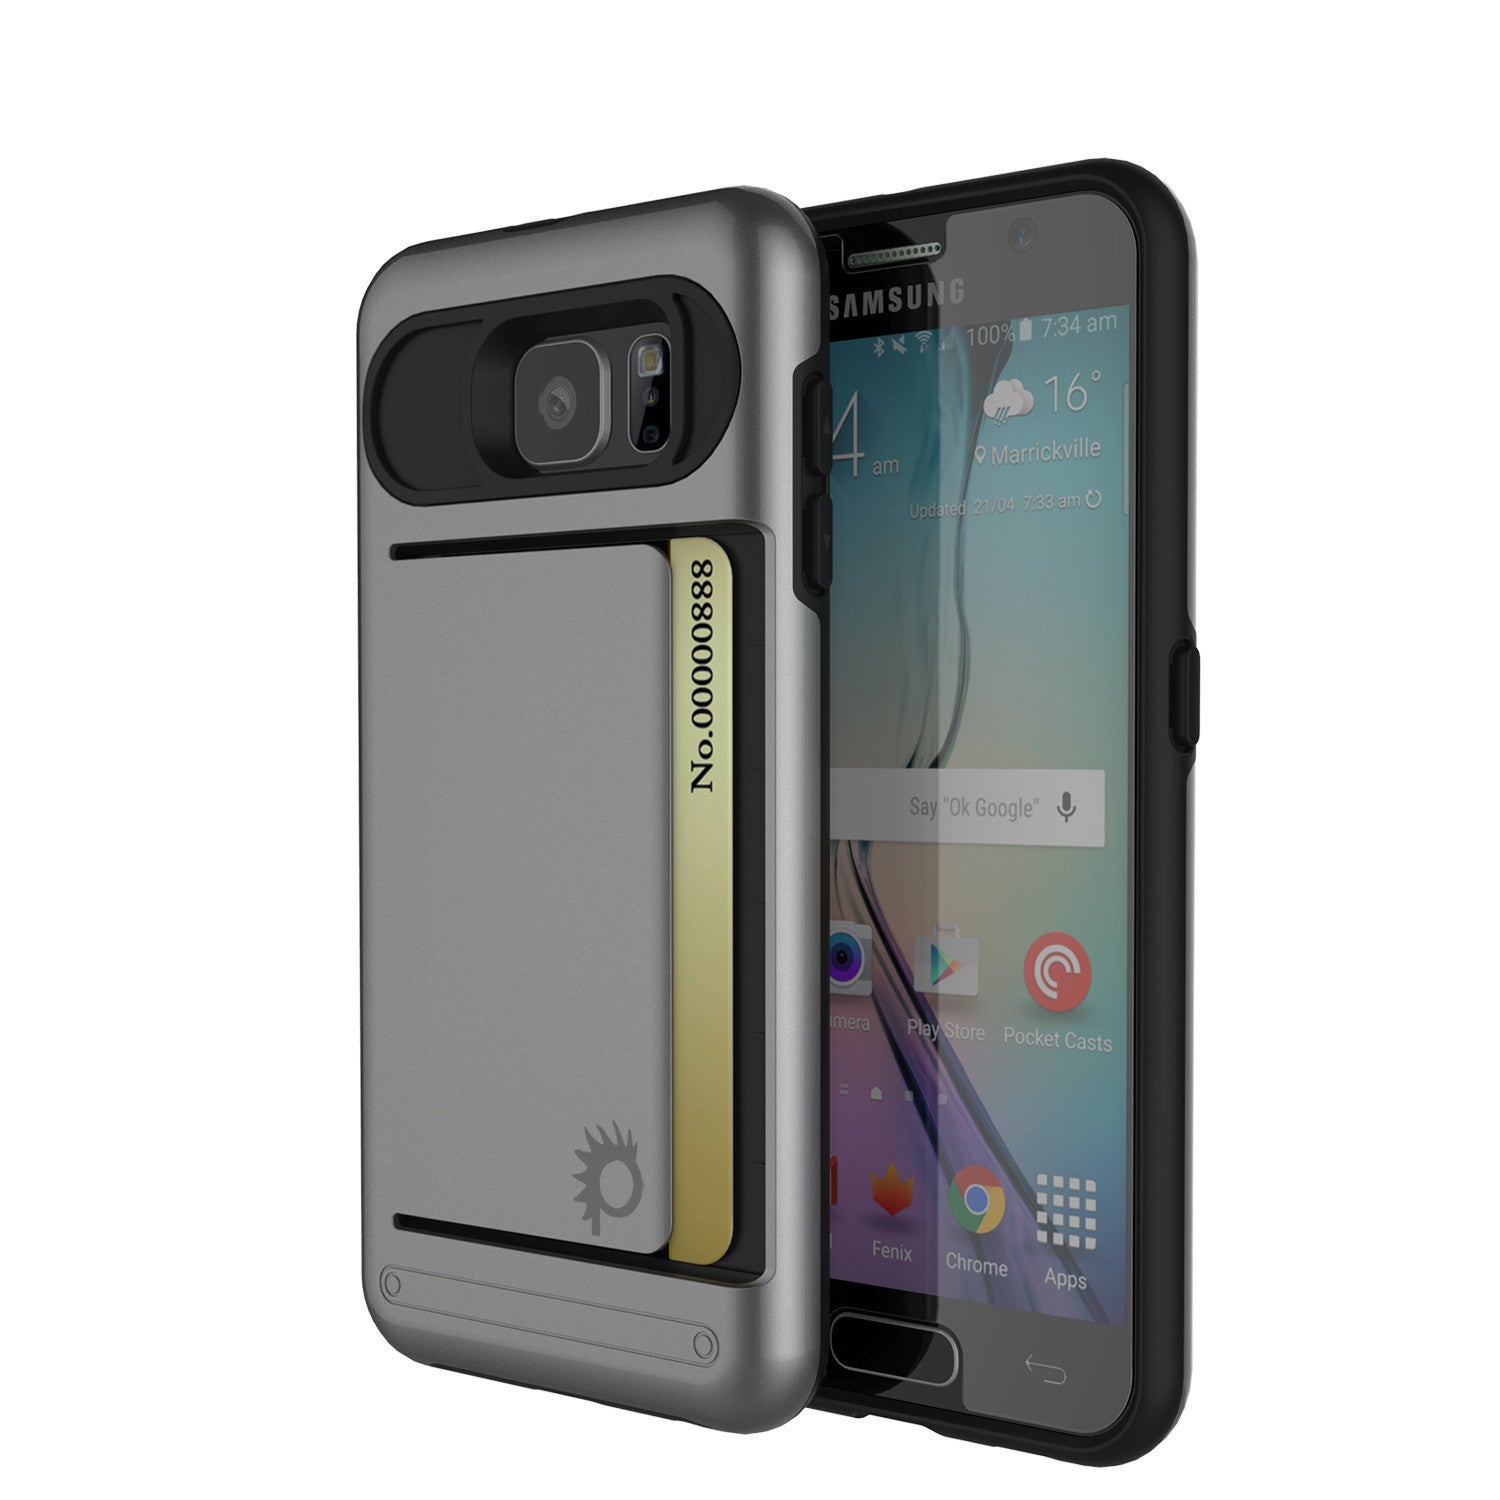 Galaxy S6 EDGE Case PunkCase CLUTCH Grey Series Slim Armor Soft Cover Case w/ Screen Protector (Color in image: Grey)